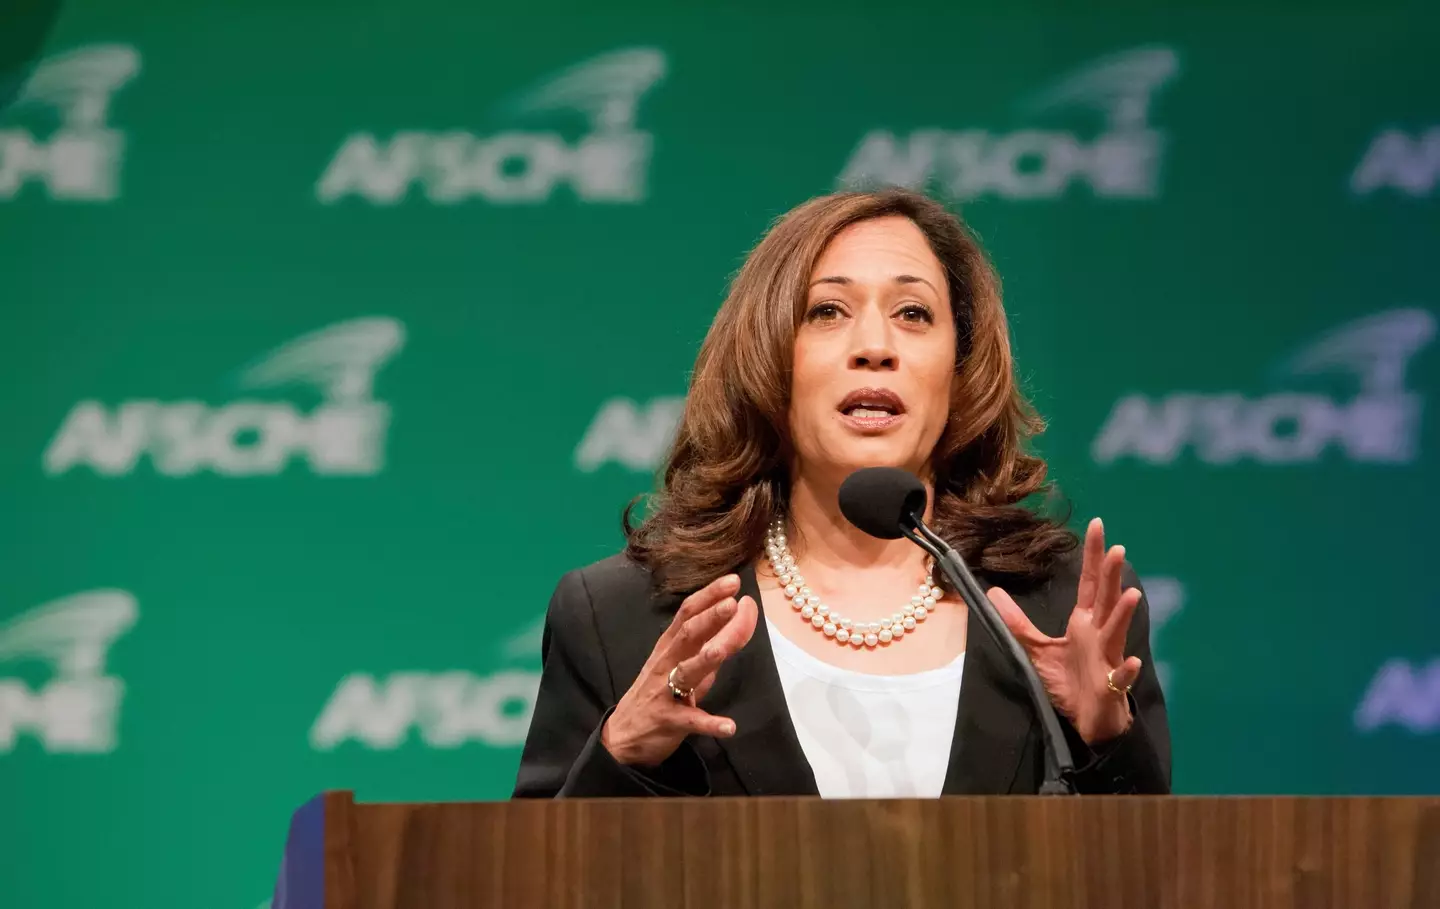 Kamala has faced a rocky road during her first year as Vice President. [